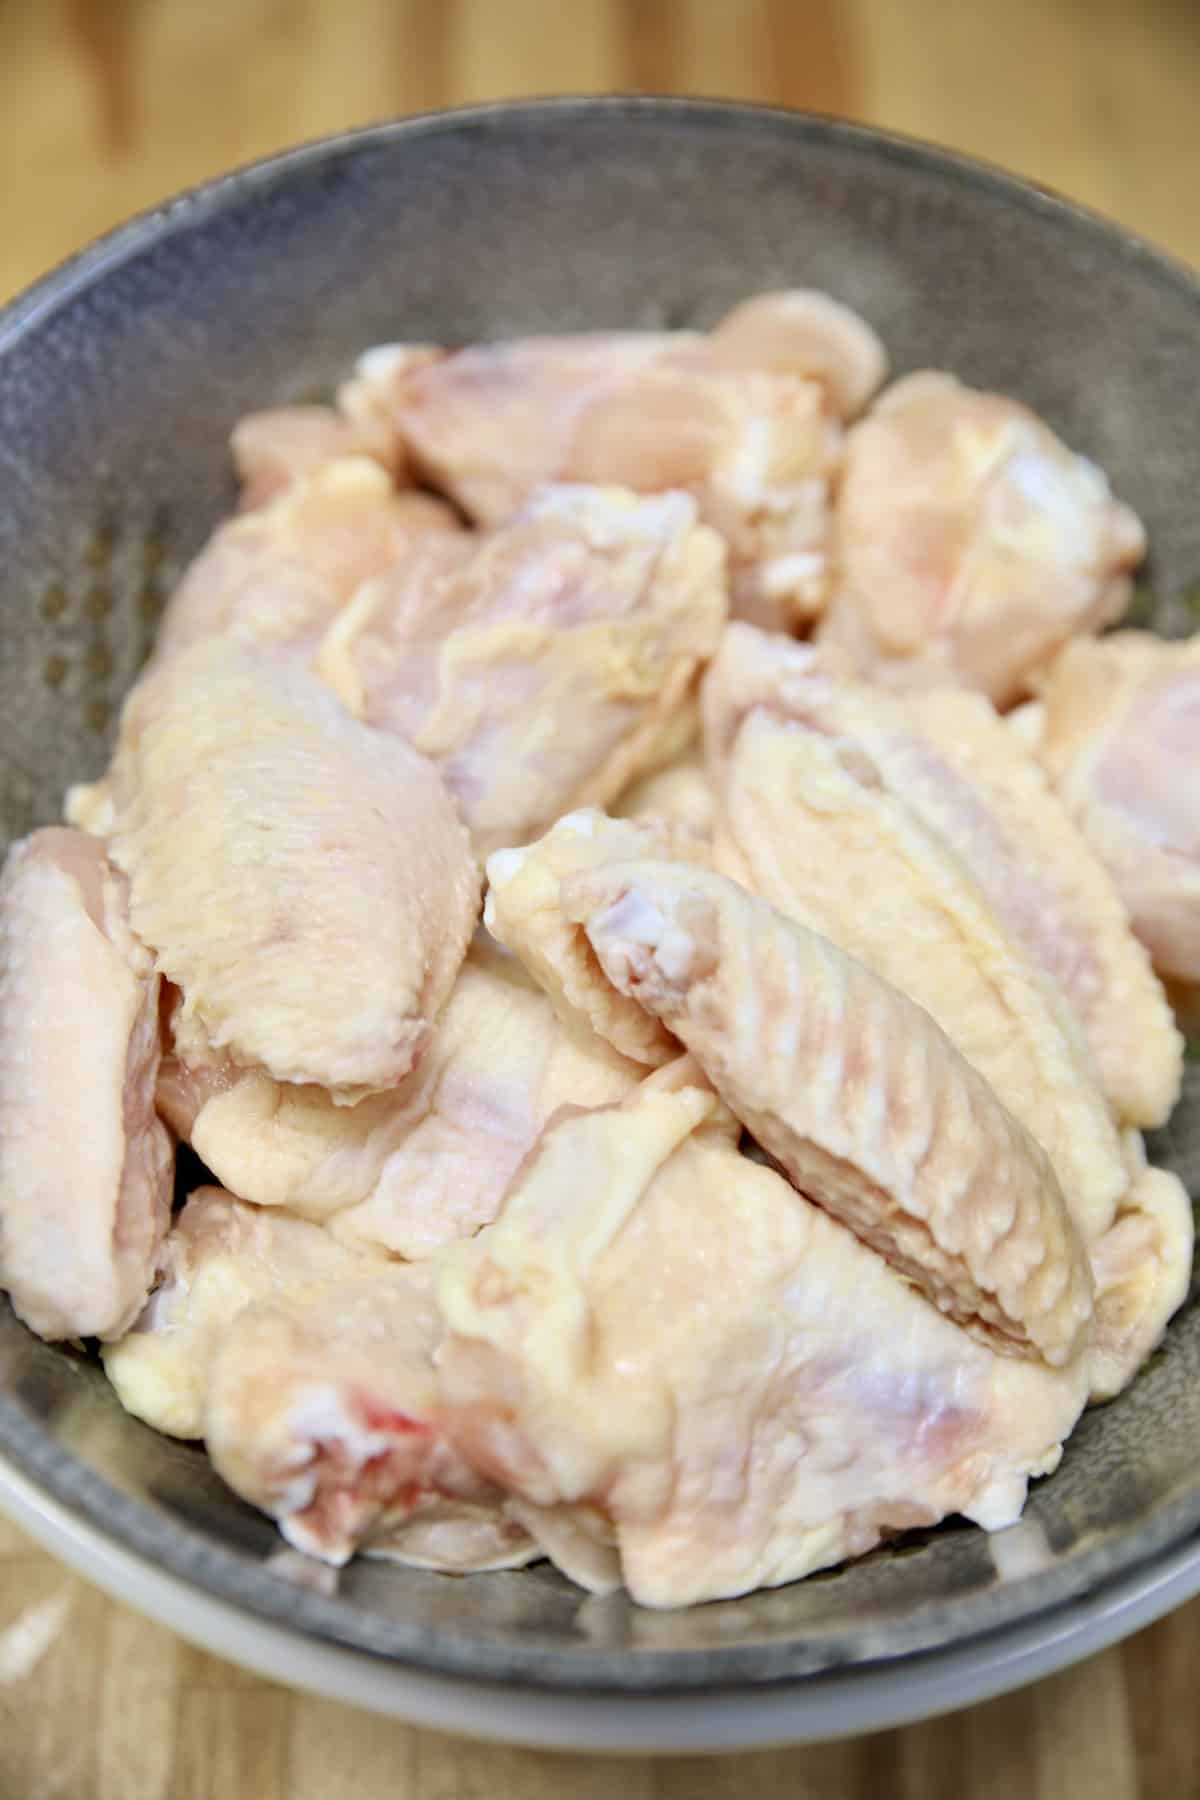 Raw chicken wings in a colander.